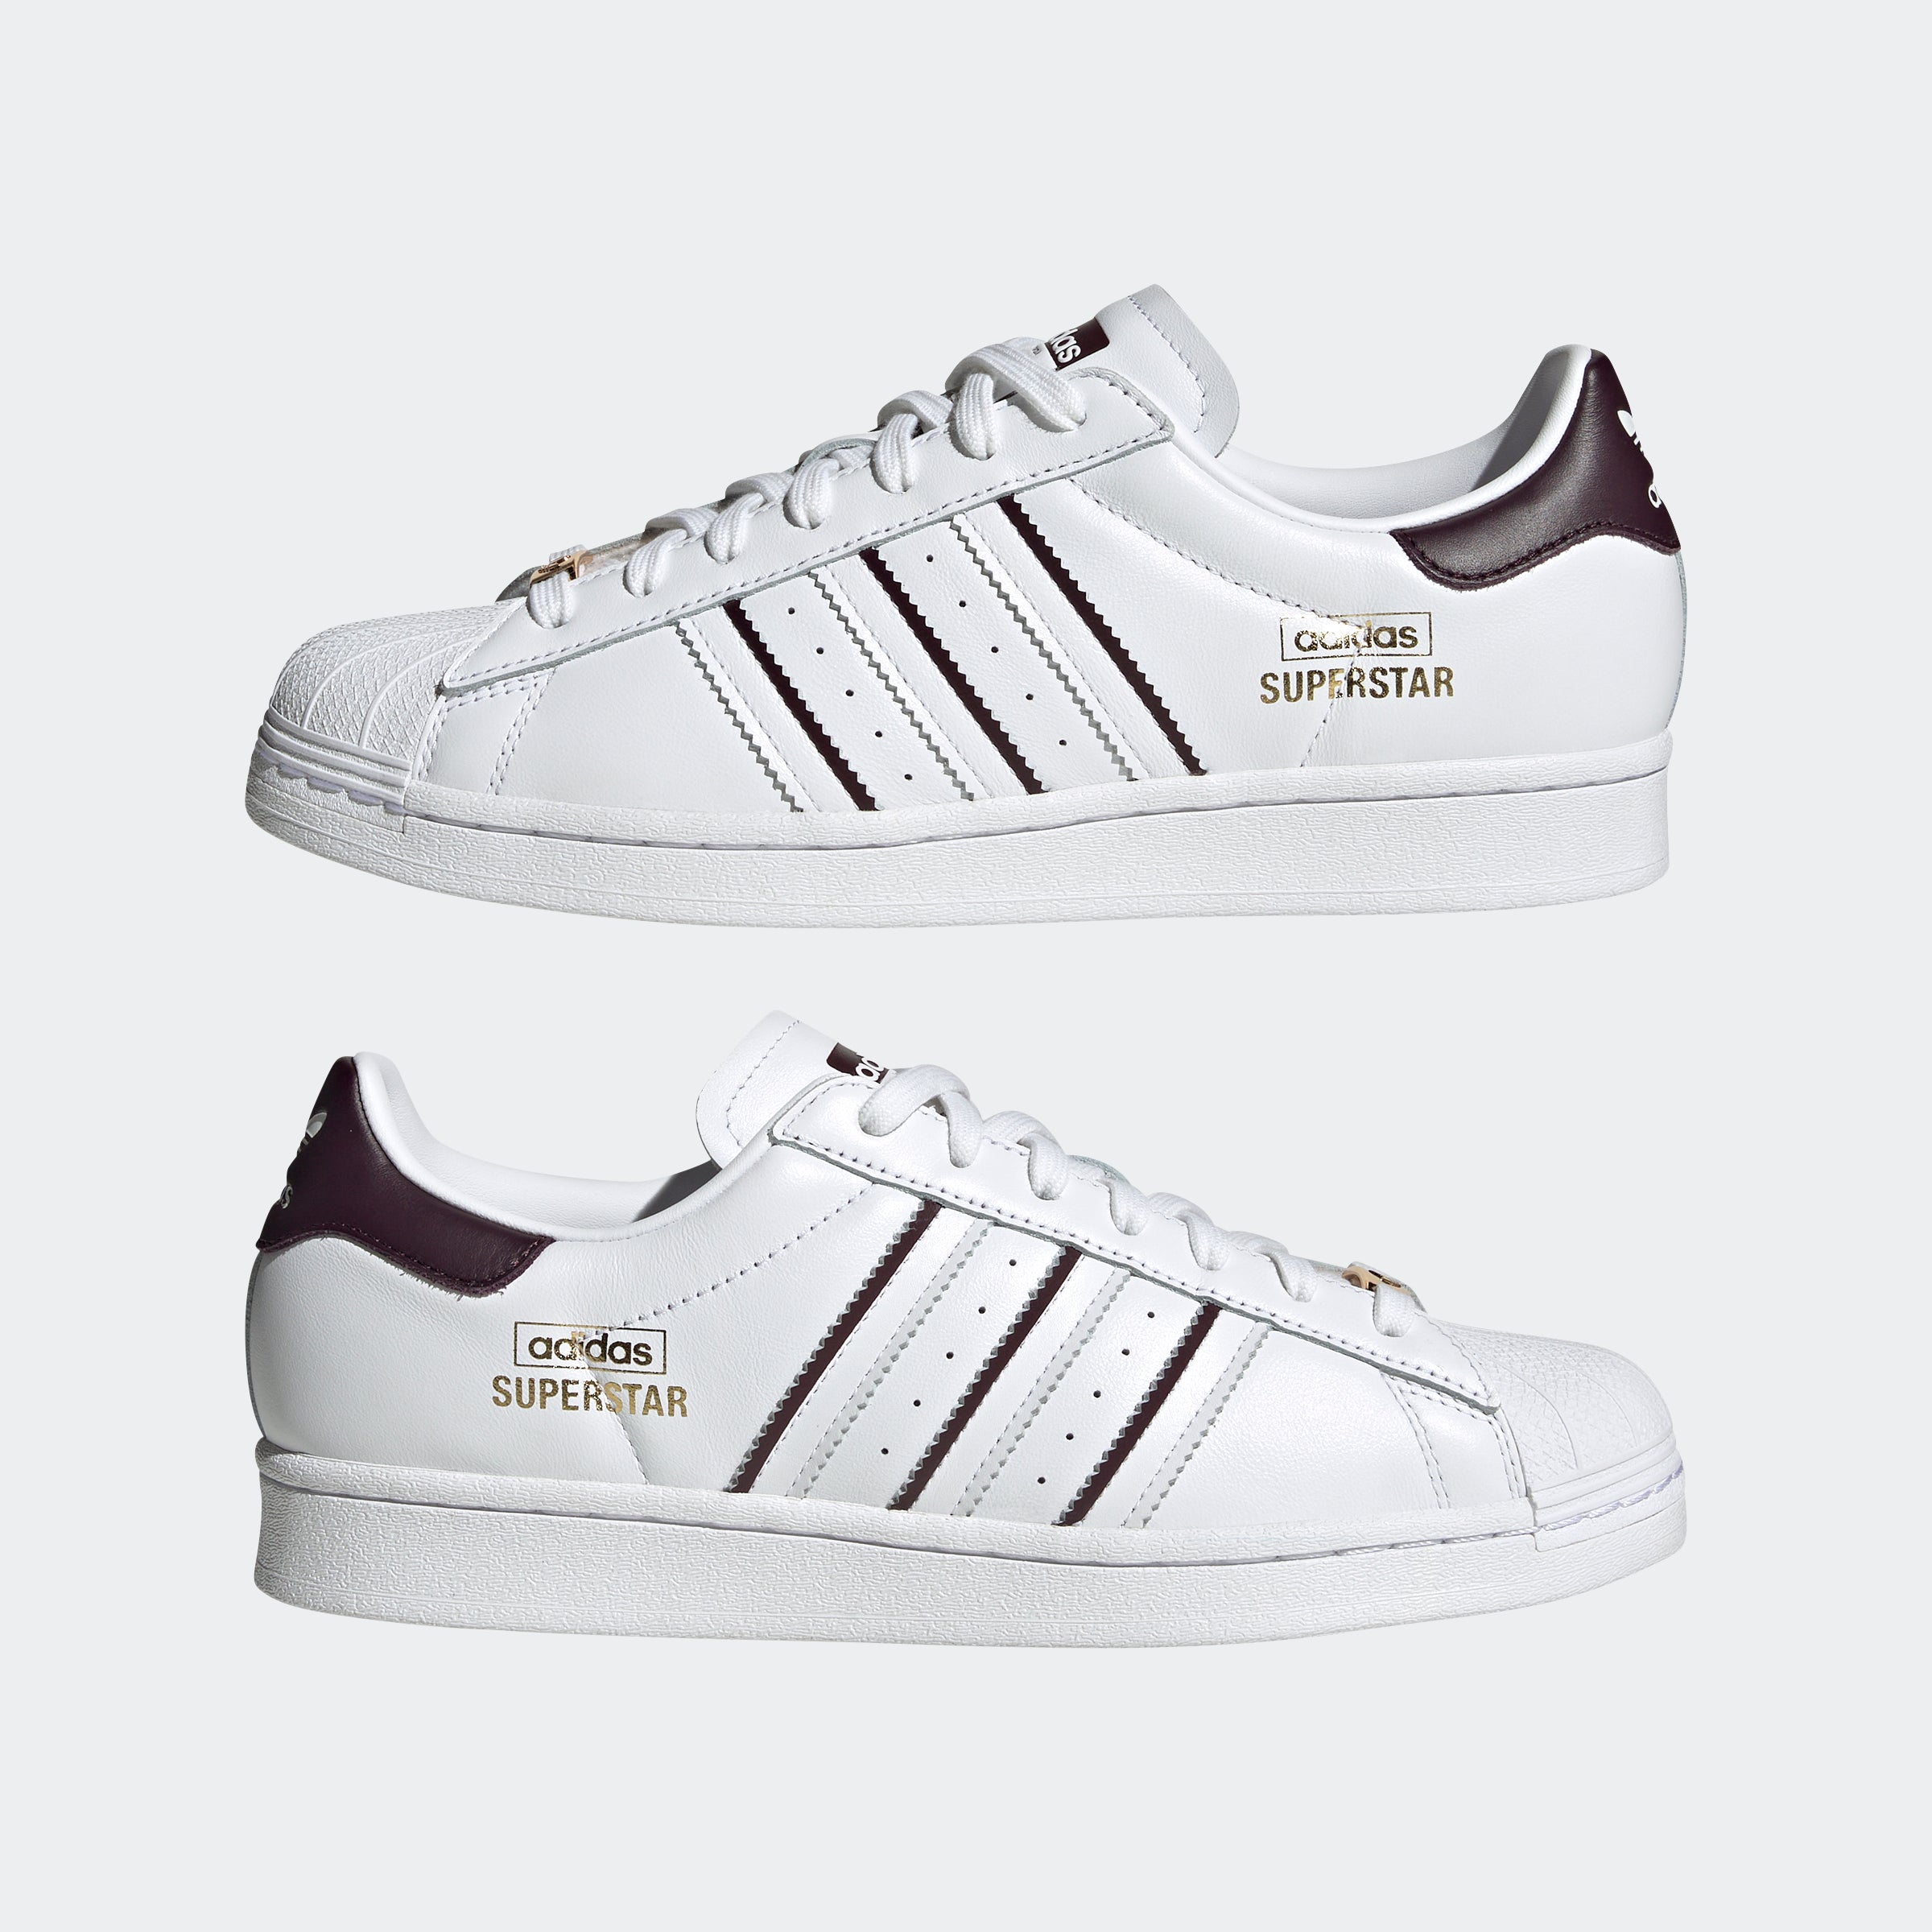 Adidas Superstar Trainers Triple White,shoes,basketball,mens